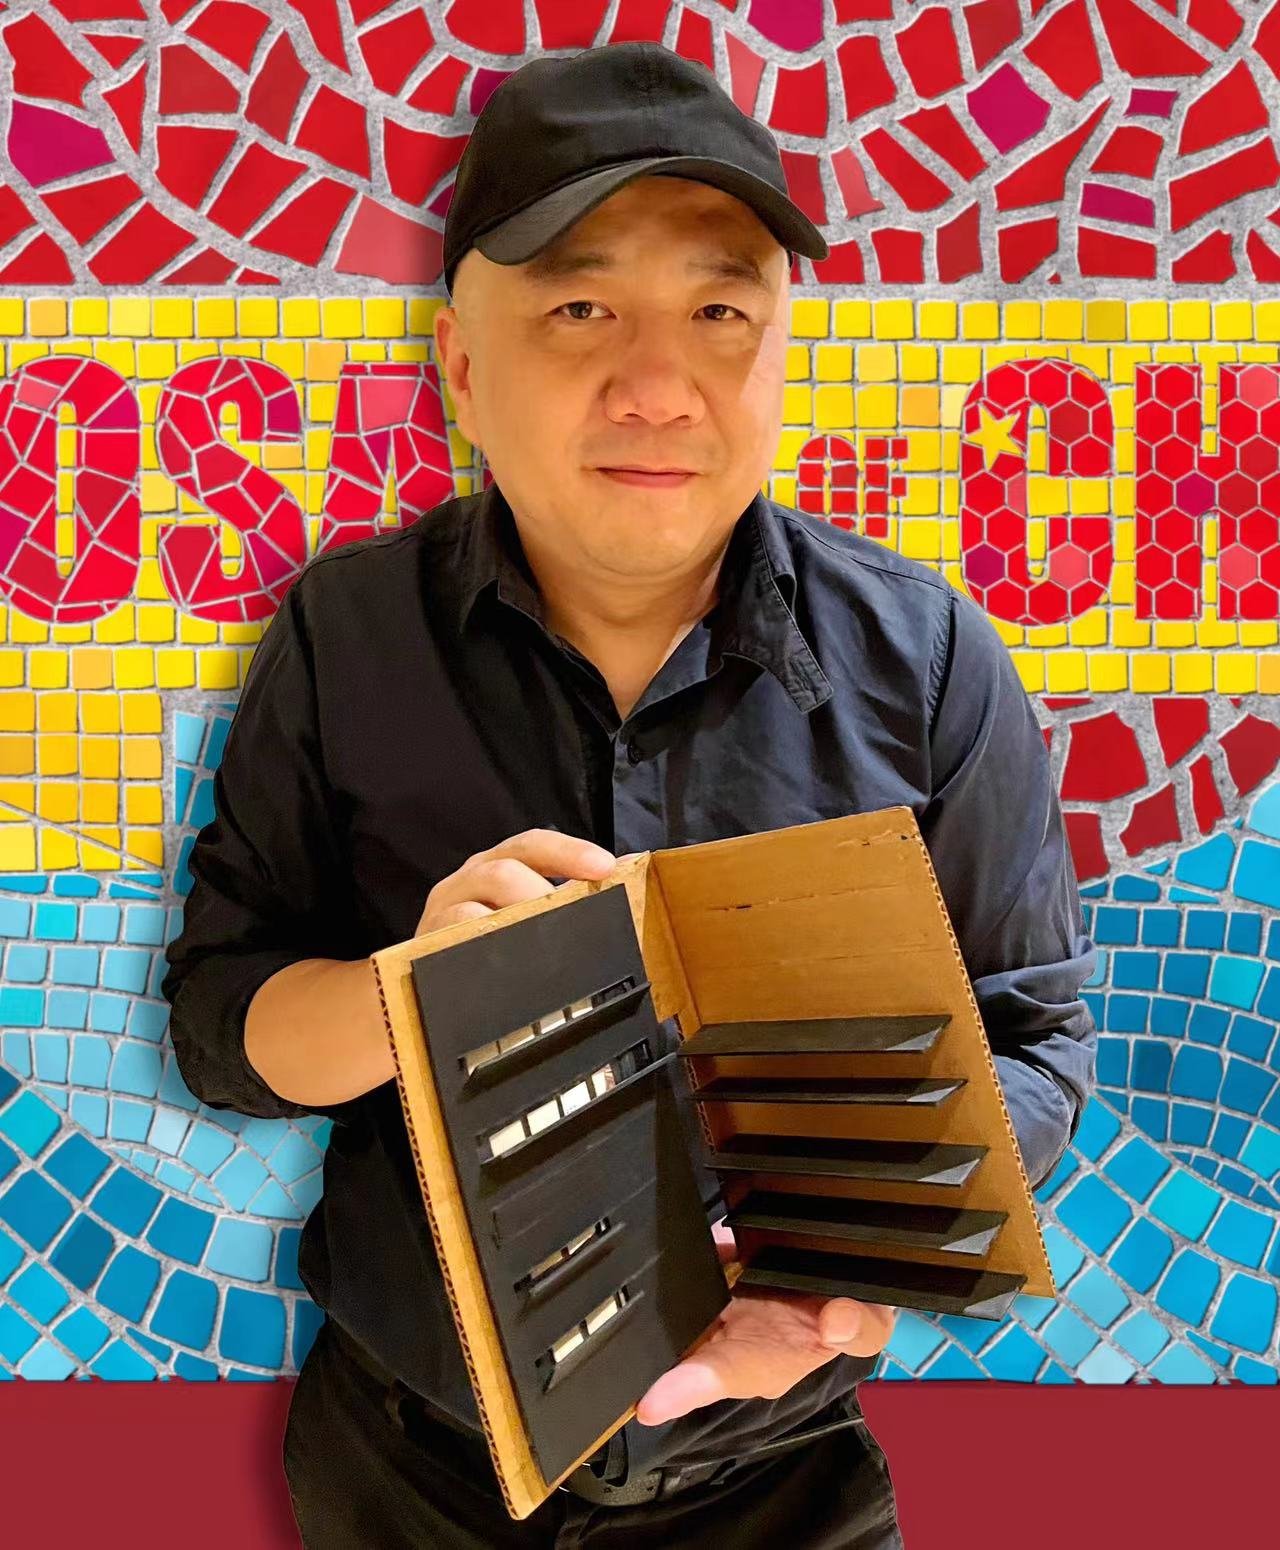 Chen Haoru's object: A model of a book kiosk that he designed back in college.